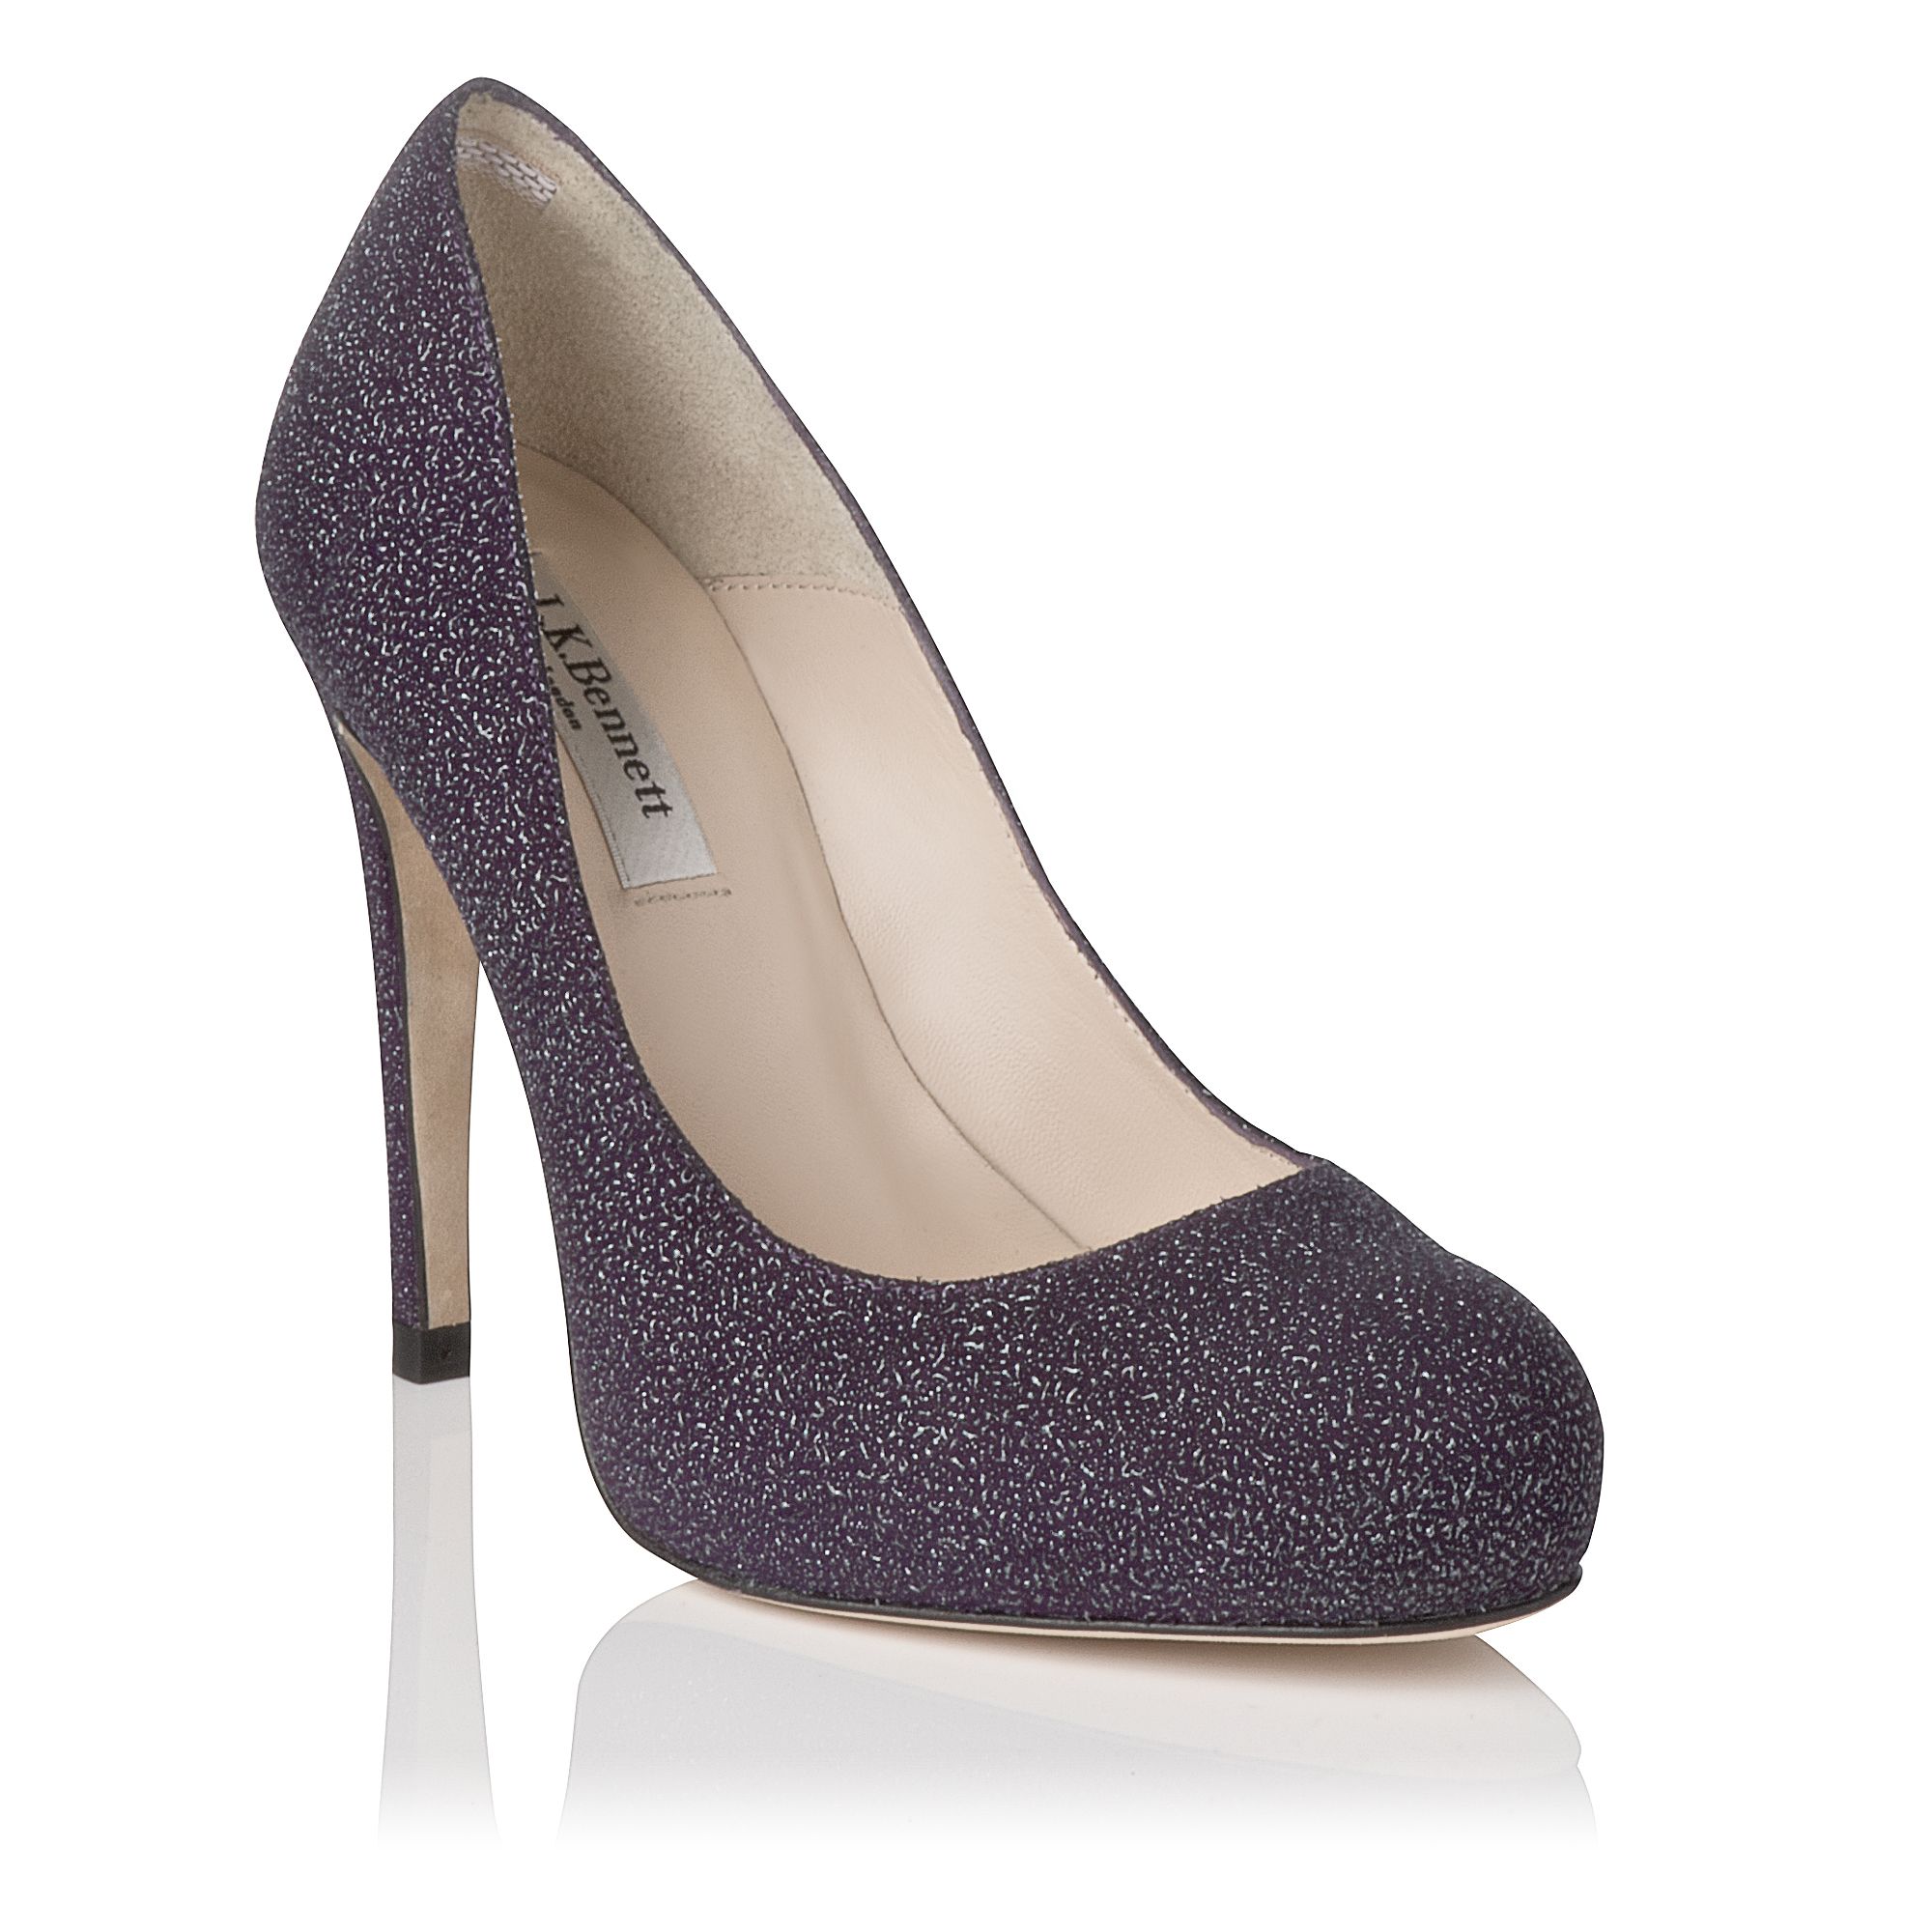 Lk Bennett Harley Closed Court Shoes in Purple (Violet) | Lyst